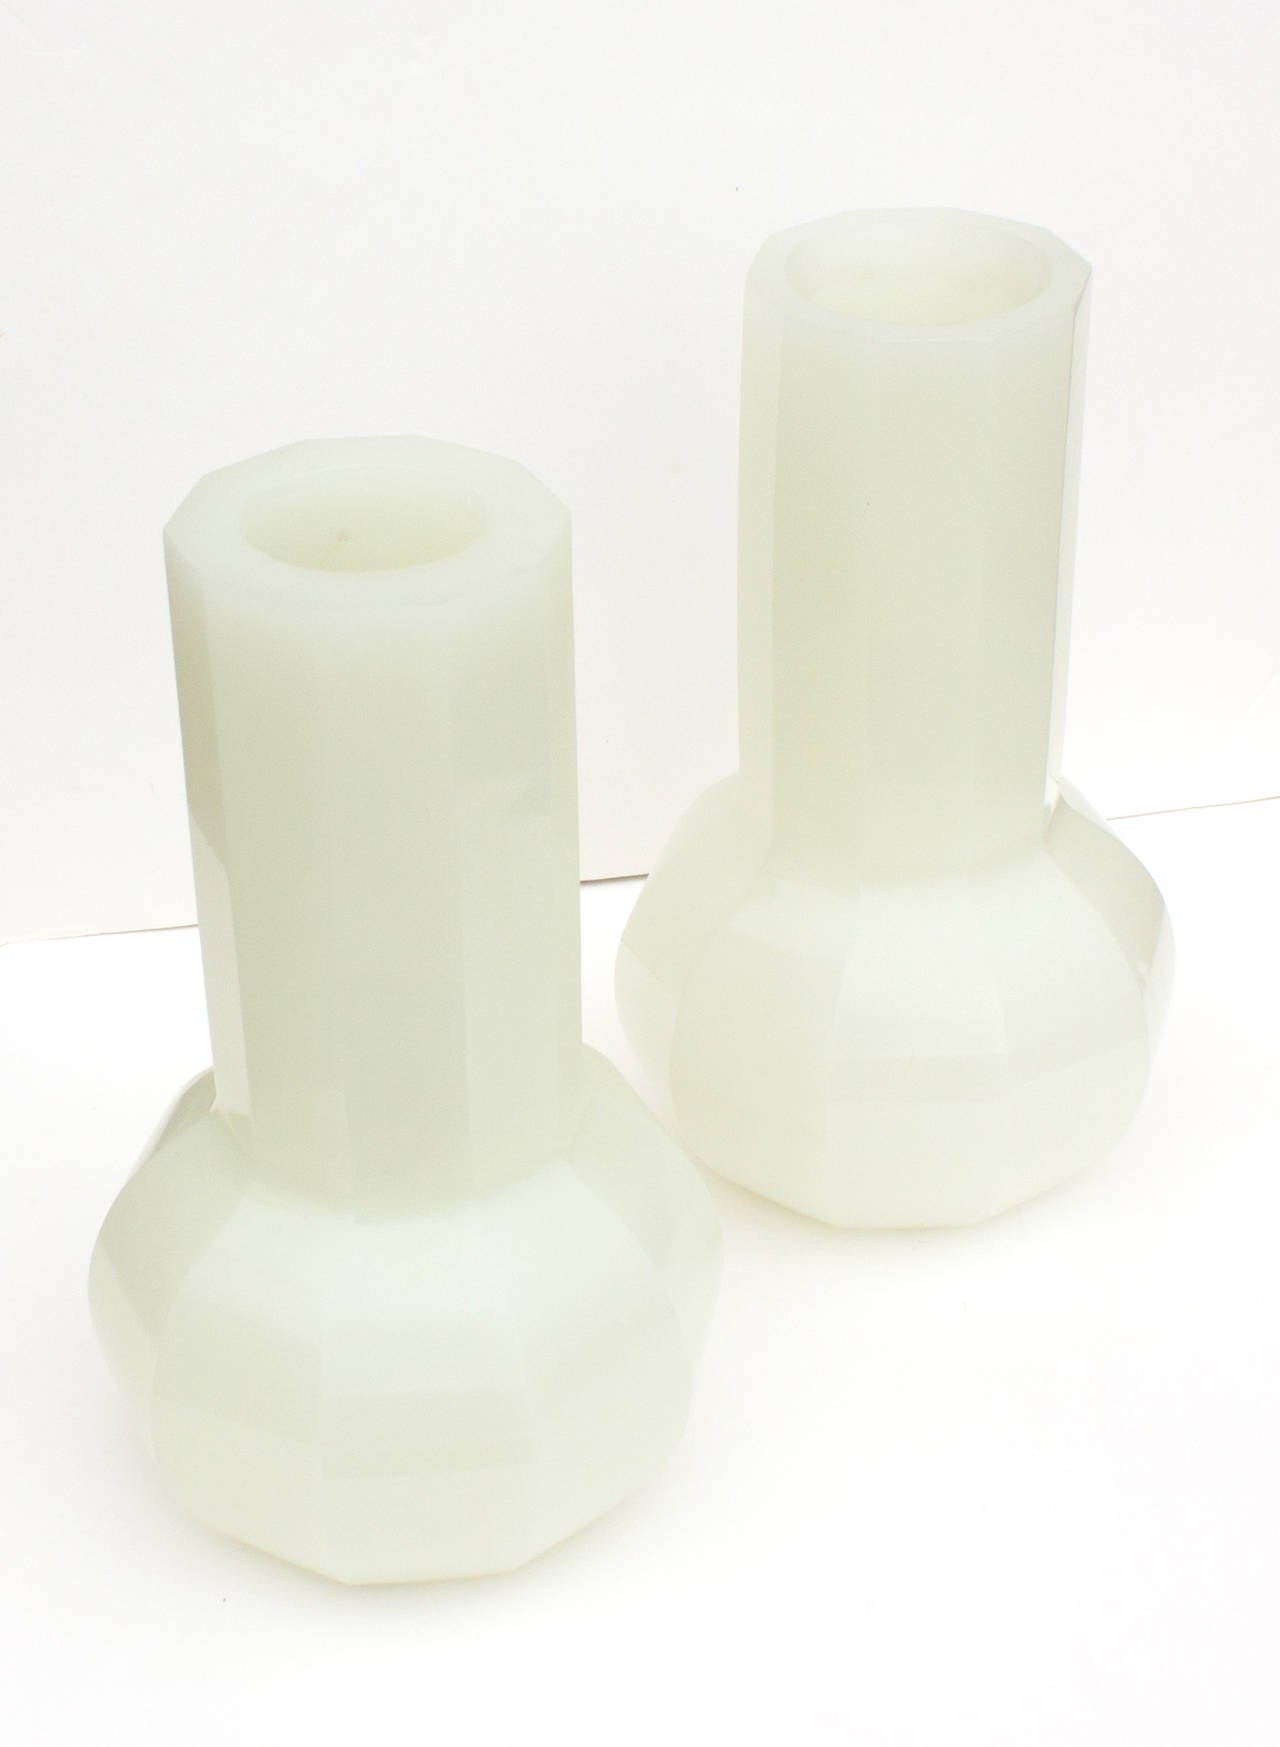 Hand-blown with meticulous care in the Peking Glass tradition, hollow glass is formed from layer upon layer of molten glass. It's color is that of Bai Jade, a cloudy white hue with soft green undertones, that is uniquely stunning. This